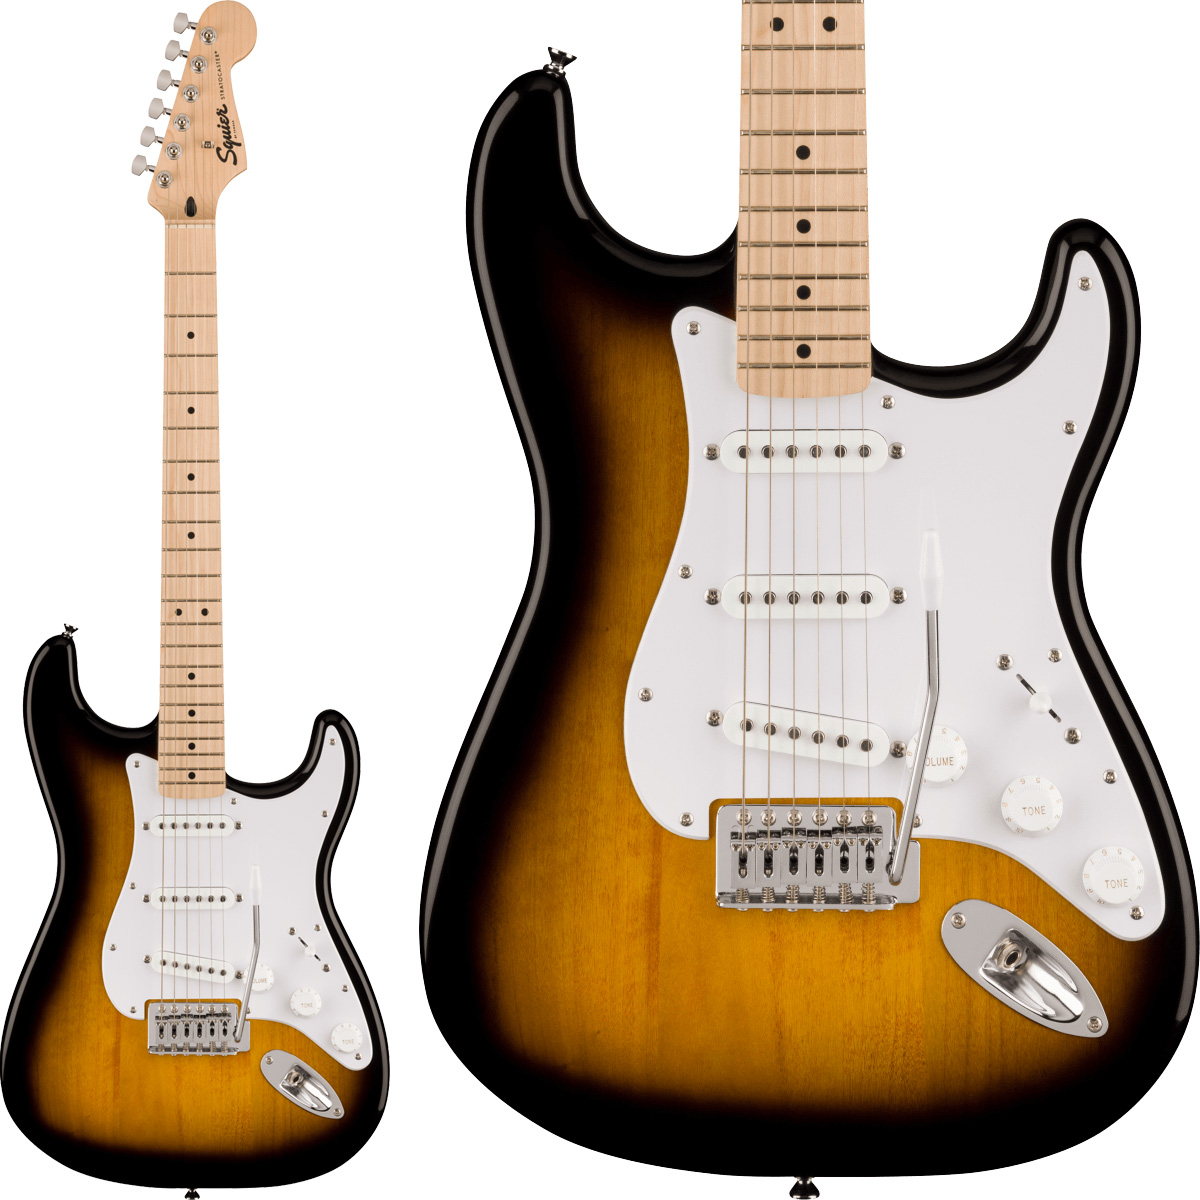 【3941】 Squier by Fender Stratocaster